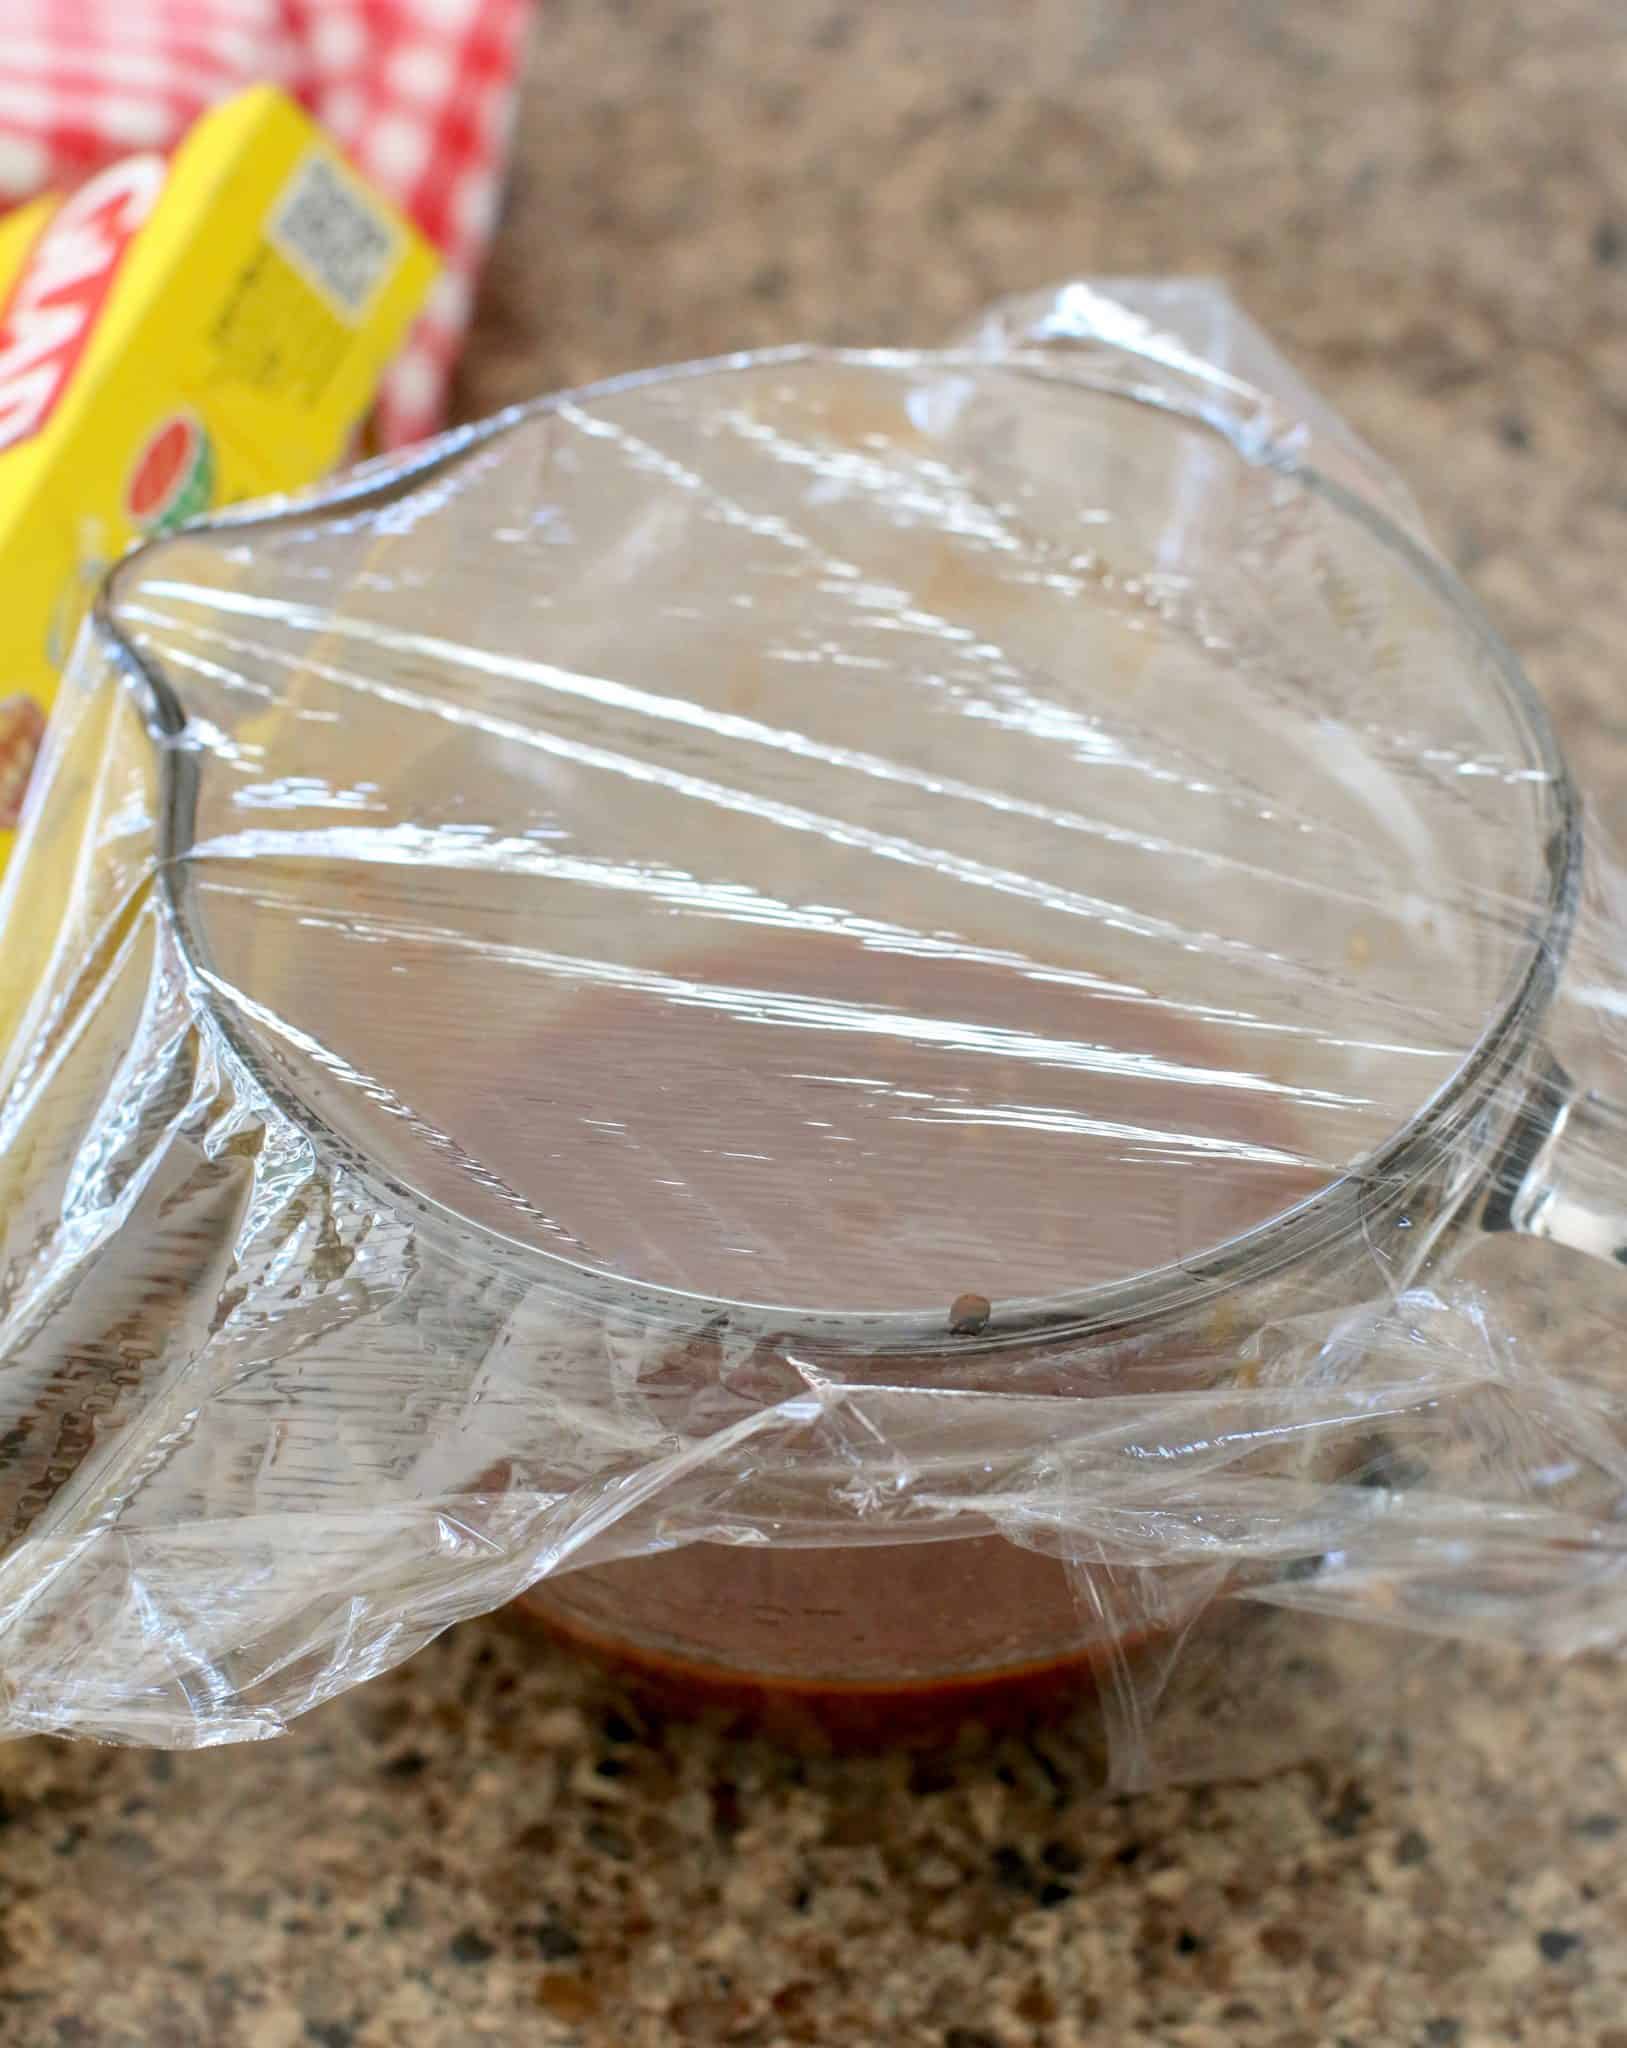 BBQ sauce in a clear bowl topped with plastic wrap.